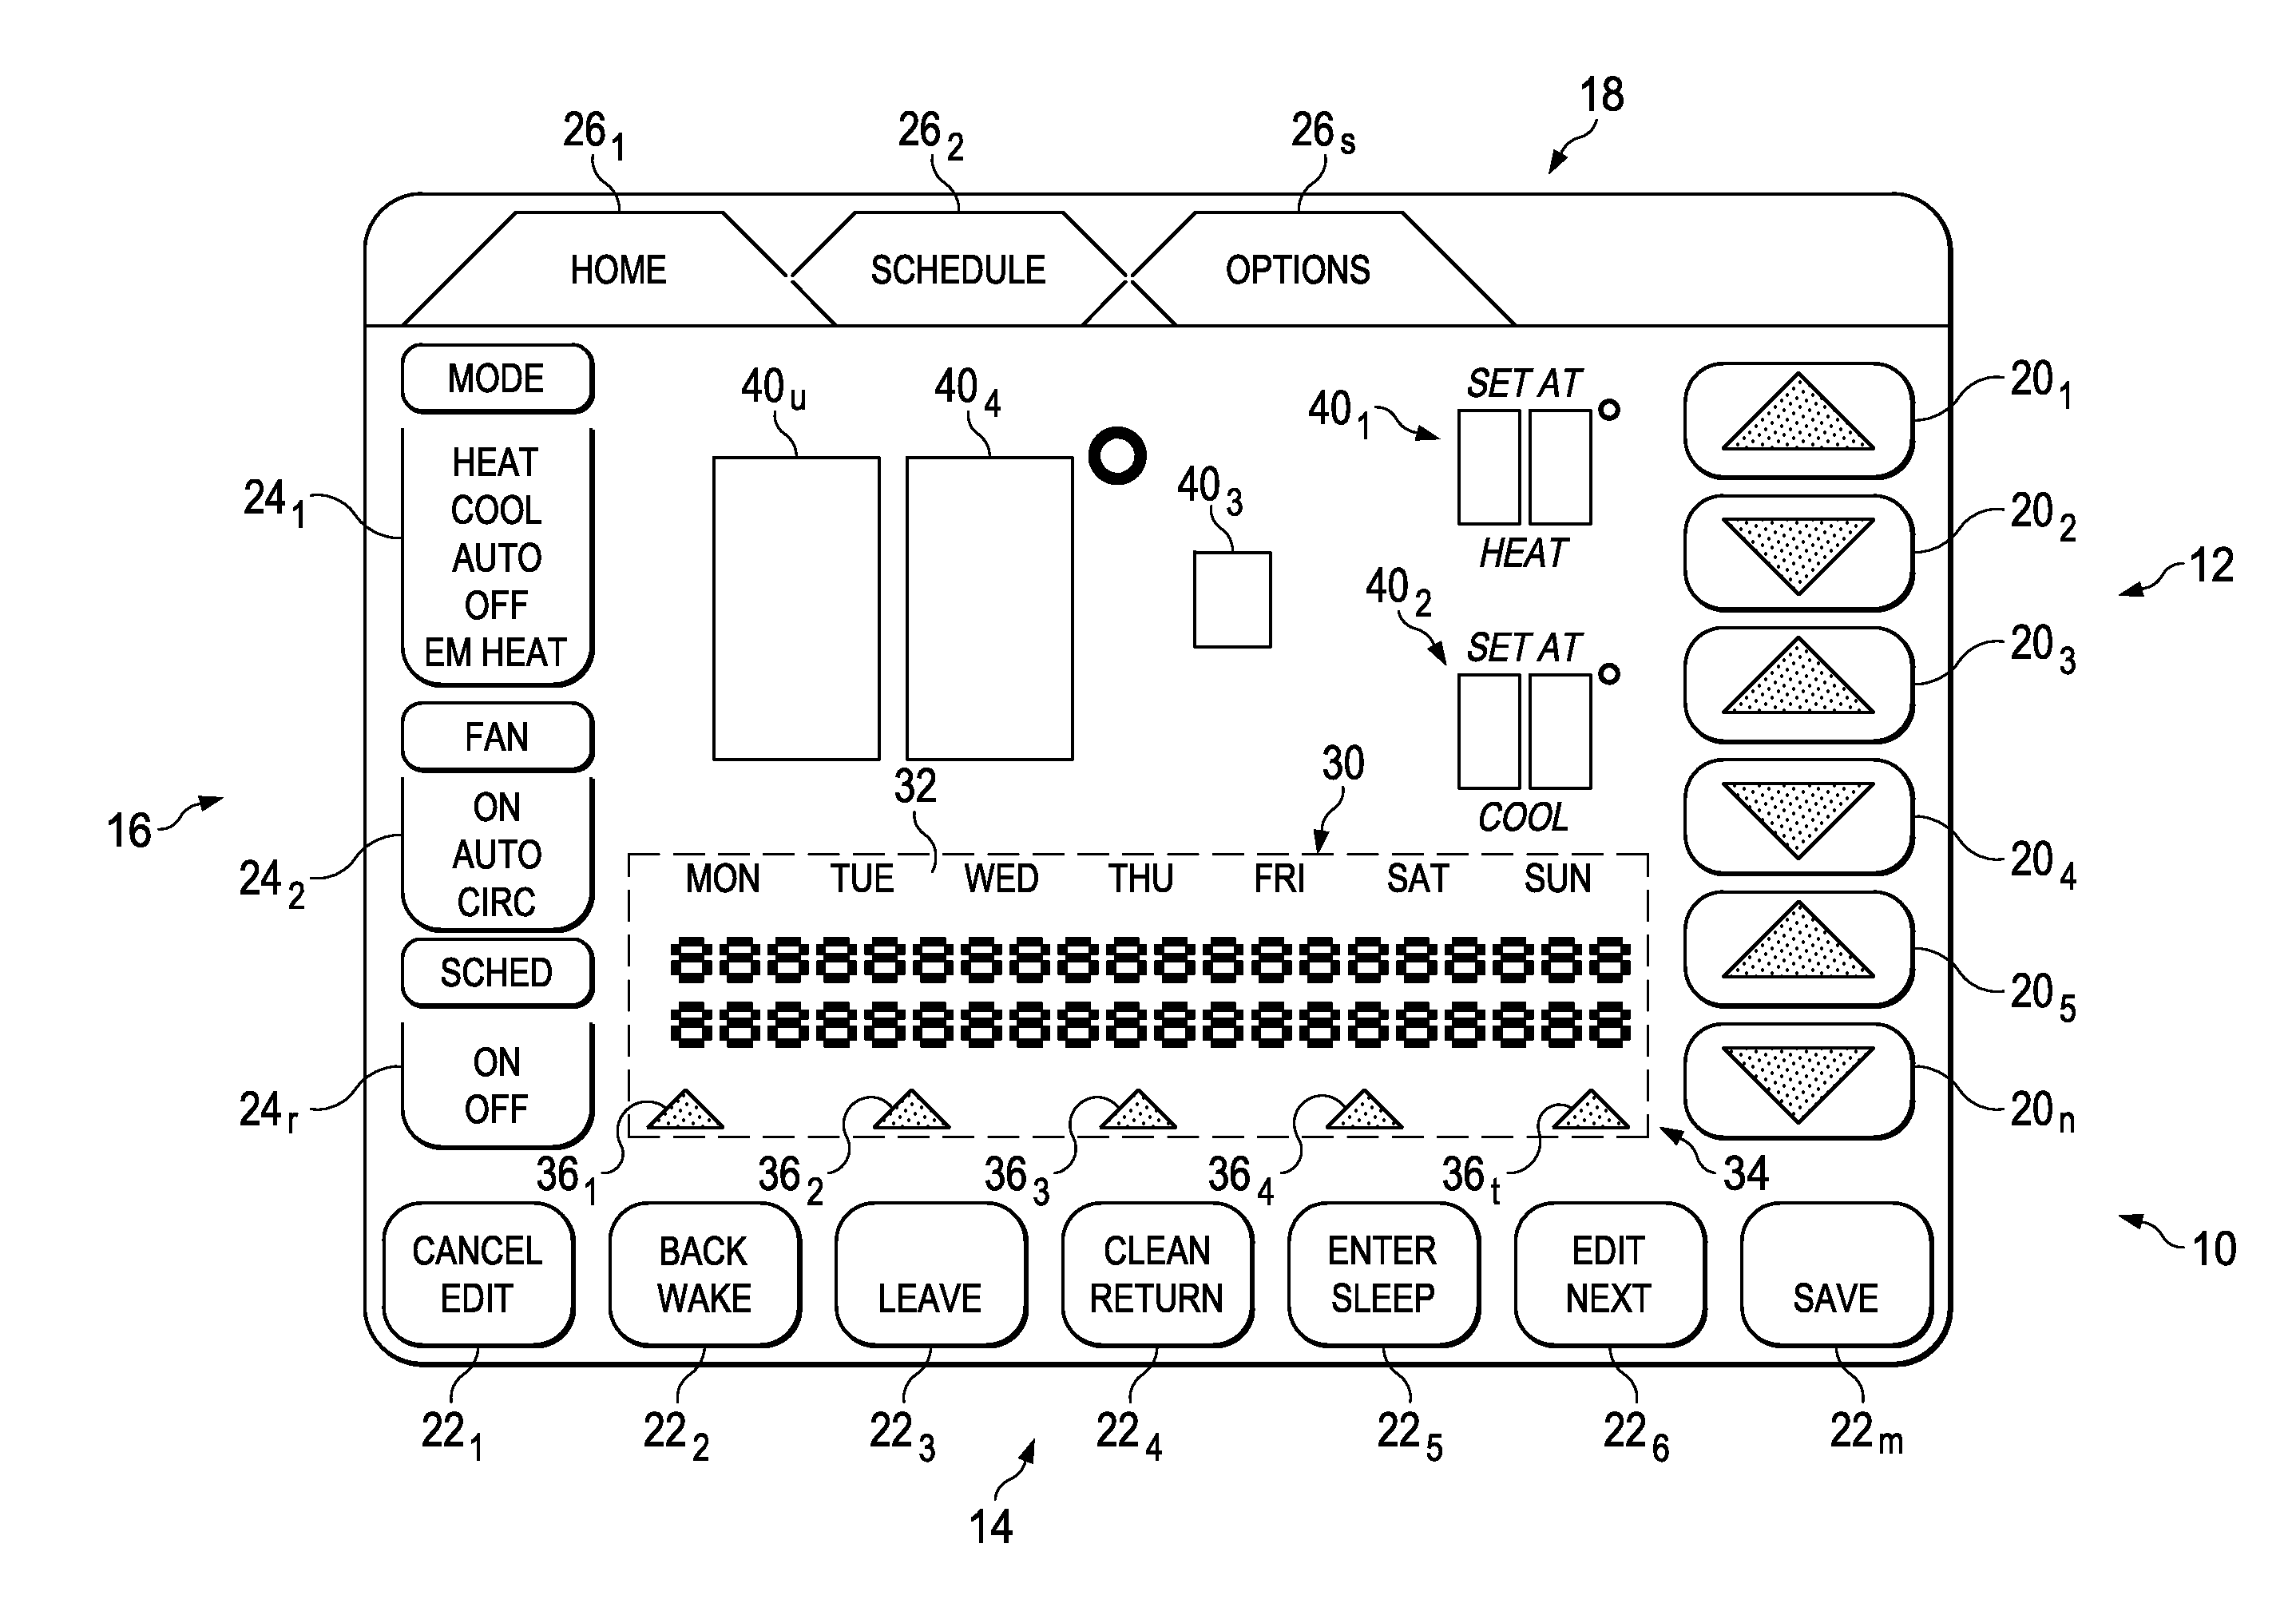 Display apparatus and method having menu and system setting scroll capability for an environmental control system